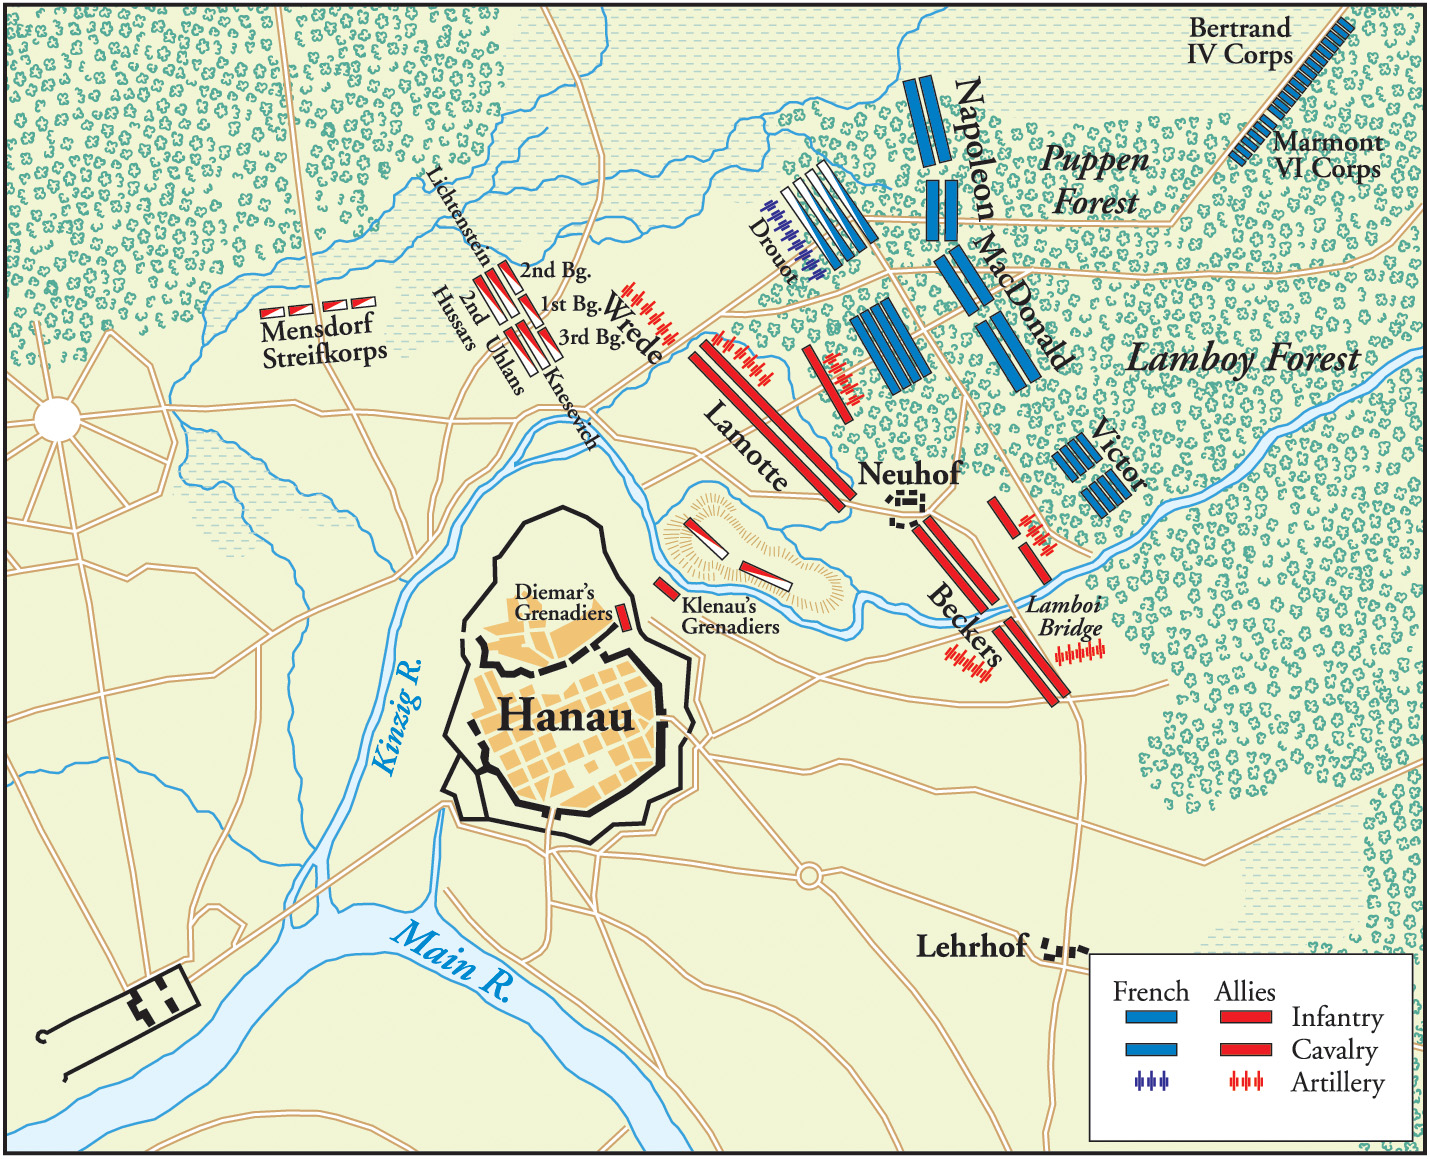 With Wrede’s forces foolishly positioned with their backs to the Kinzig River and stretched out on either side of the Lamboy Bridge, Napoleon opted to punch his way through the enemy roadblock to Frankfurt.